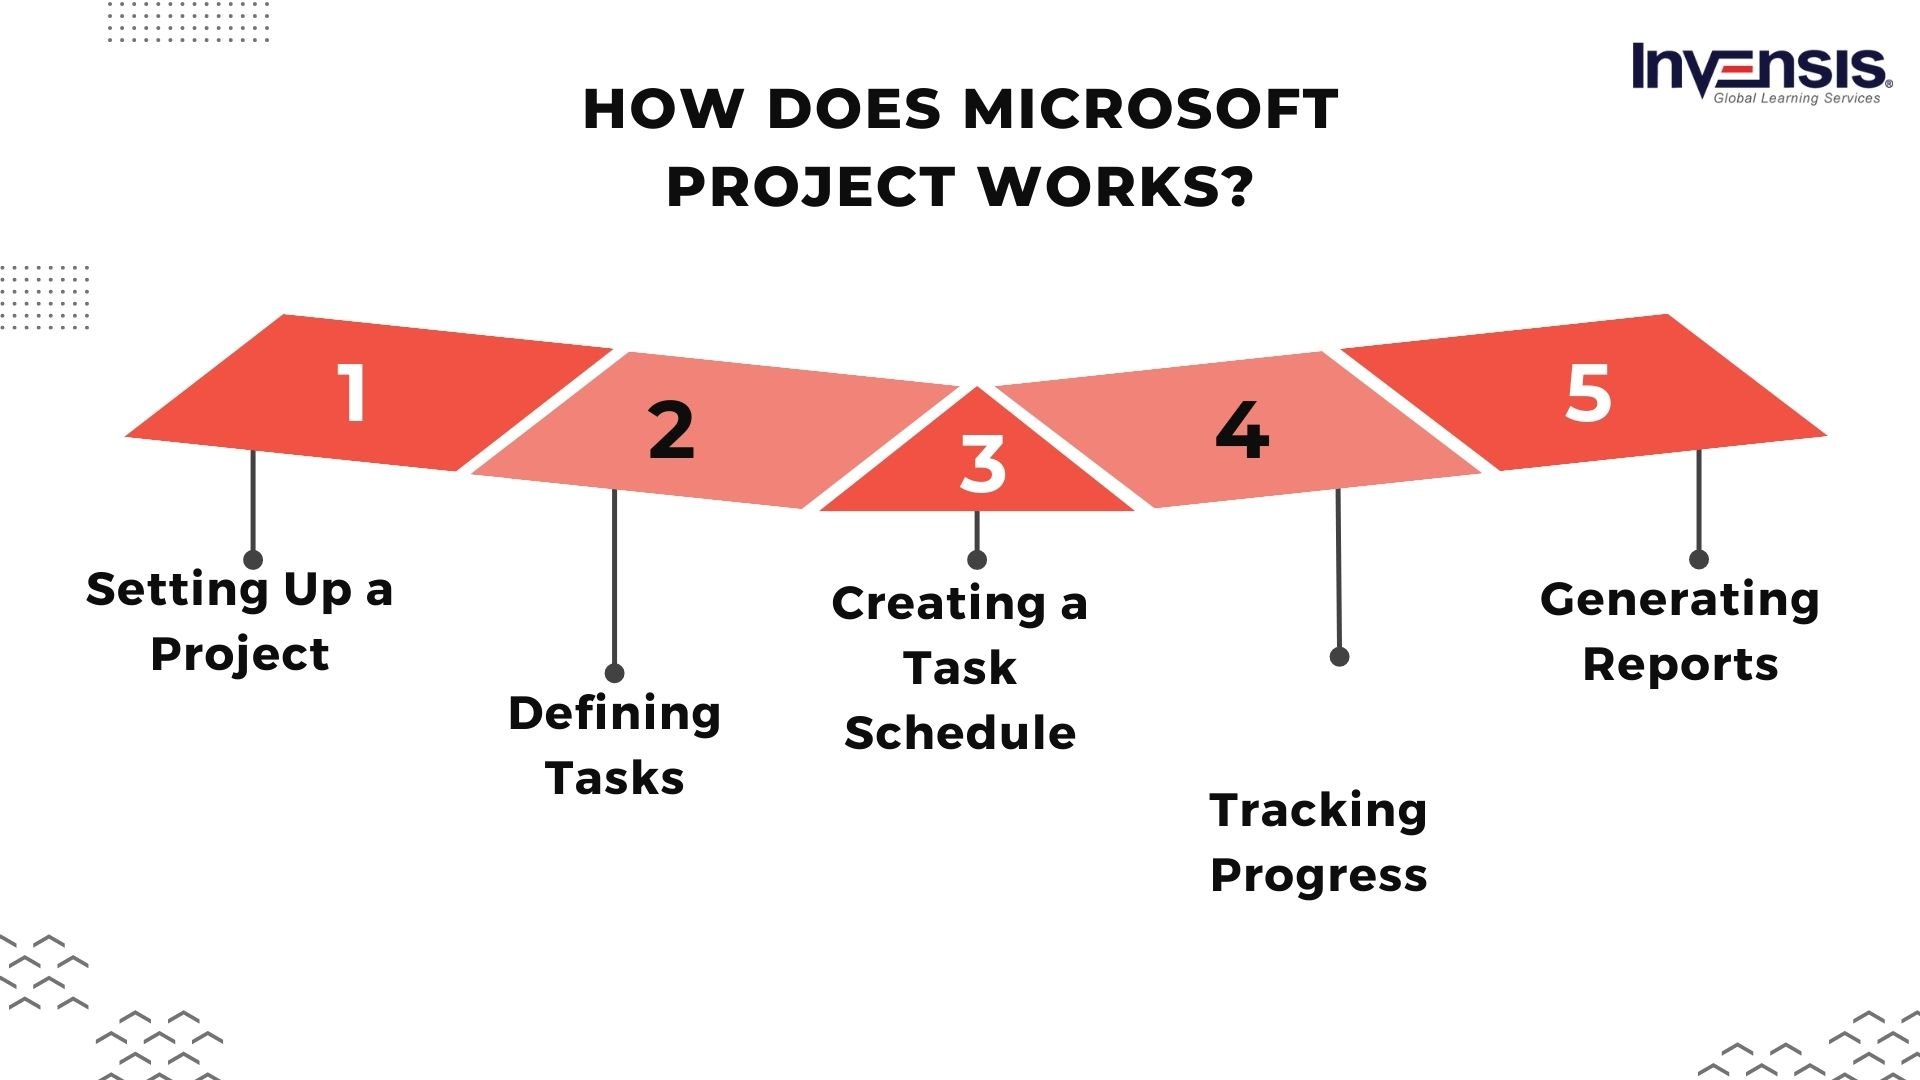 How Does Microsoft Project Work?